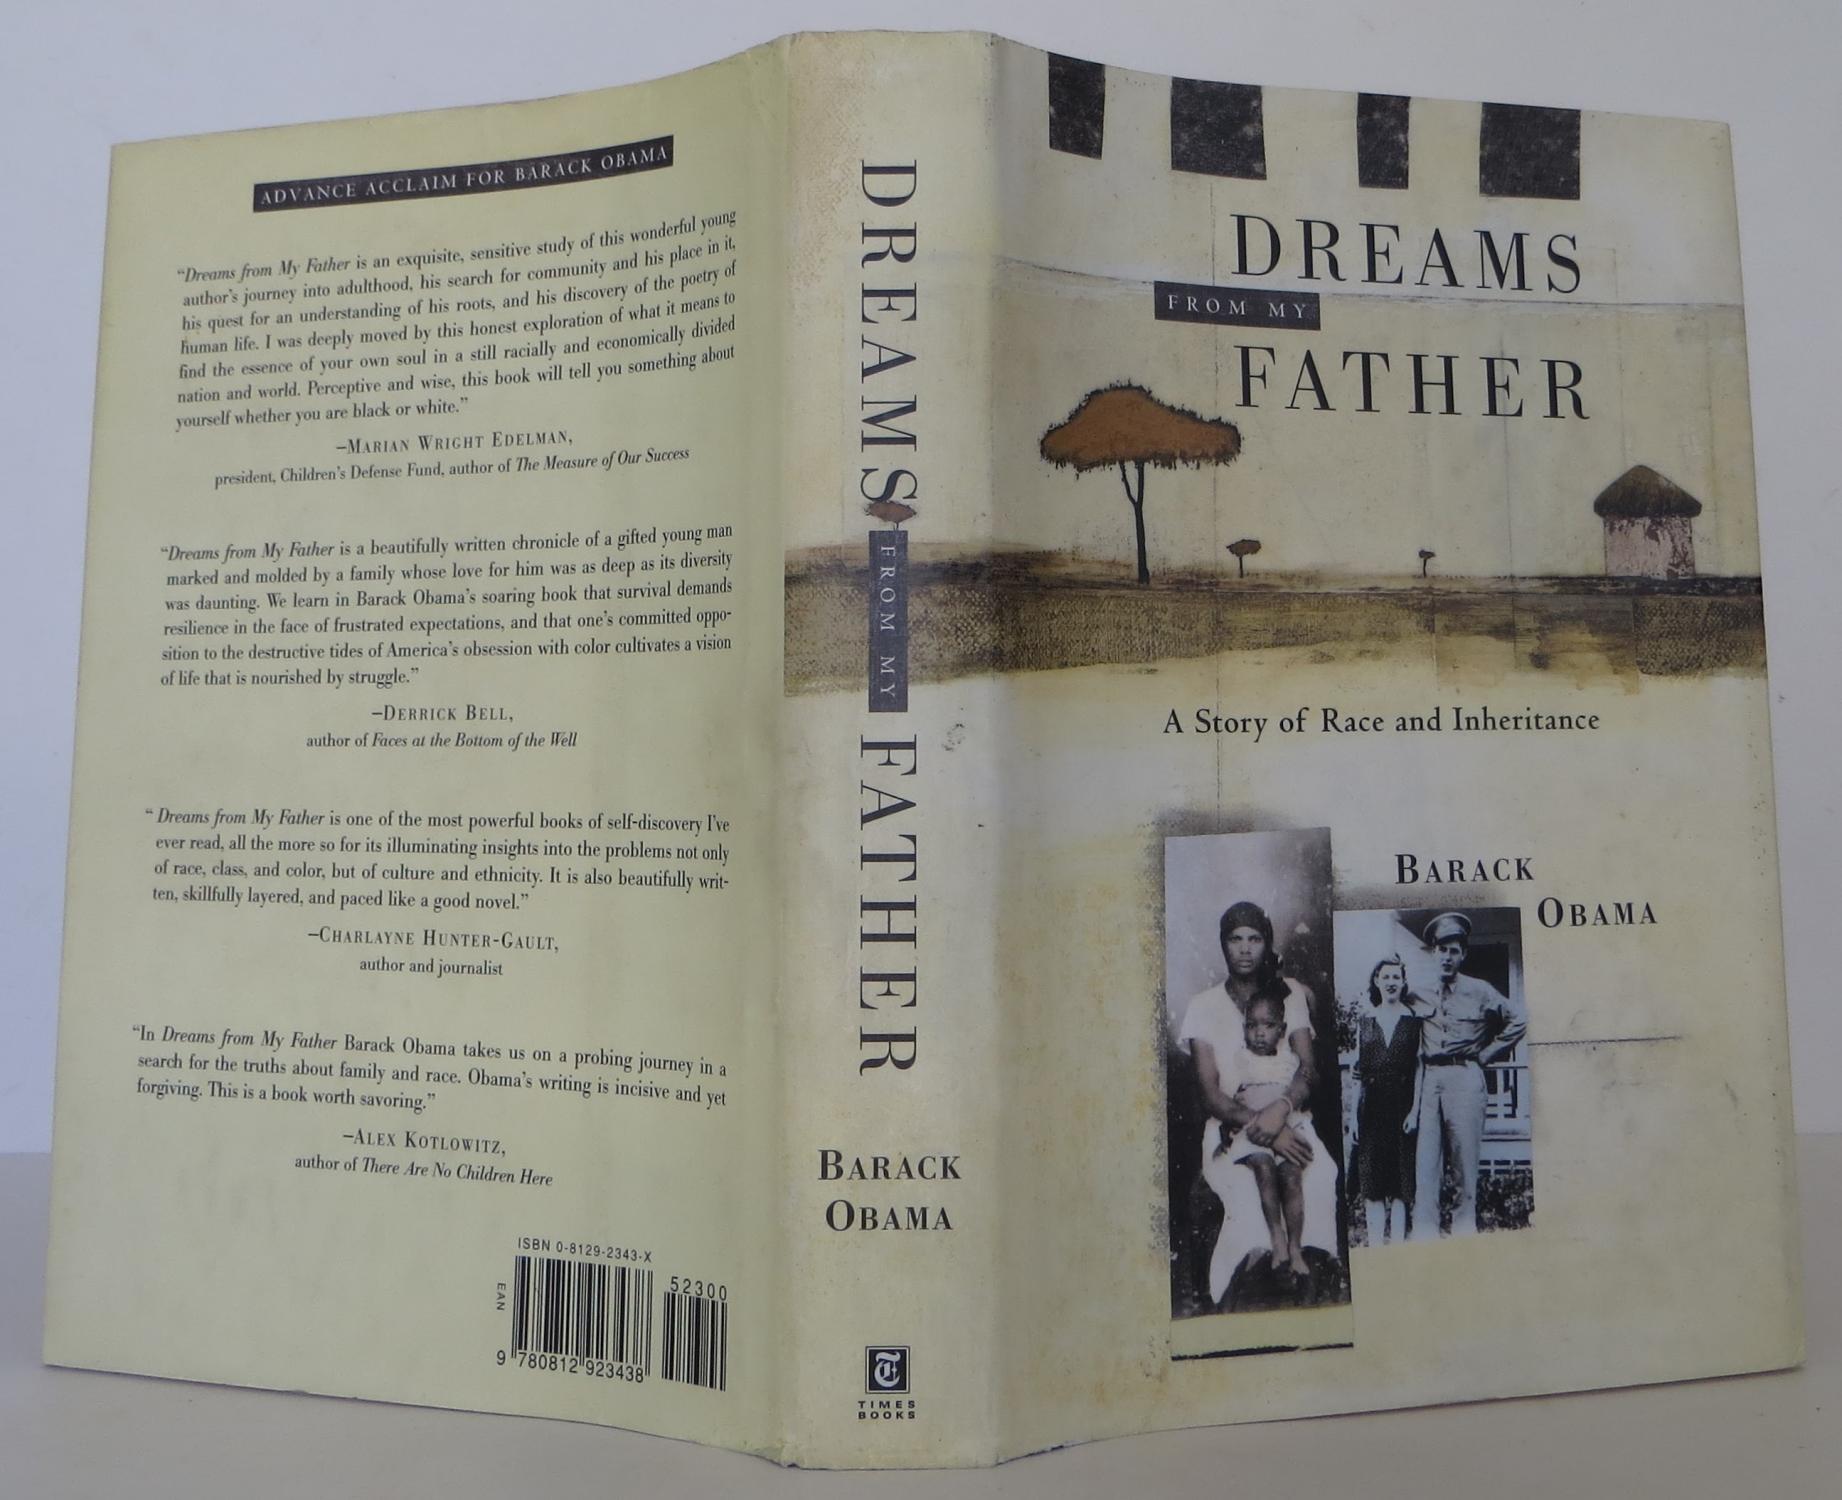 A　Dreams　1st　Barack　Obama　My　Inheritance　Race　and　of　Story　Father:　from　Edition